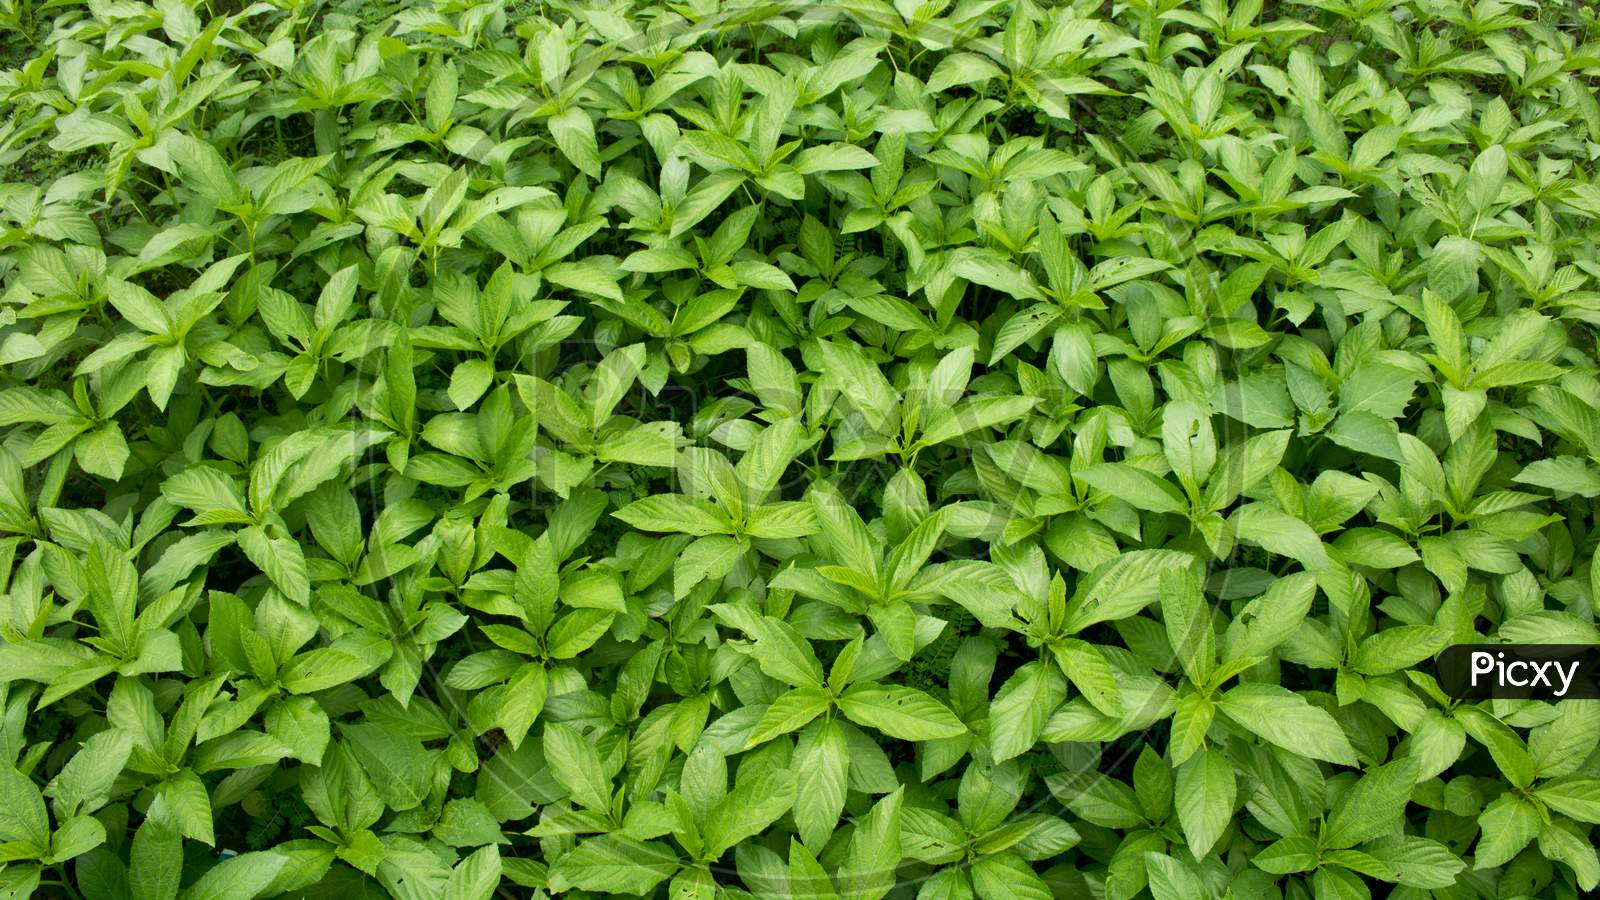 Natural Jute Leaves Background Photo, A Baby Jute Plant Growing On The Fields.